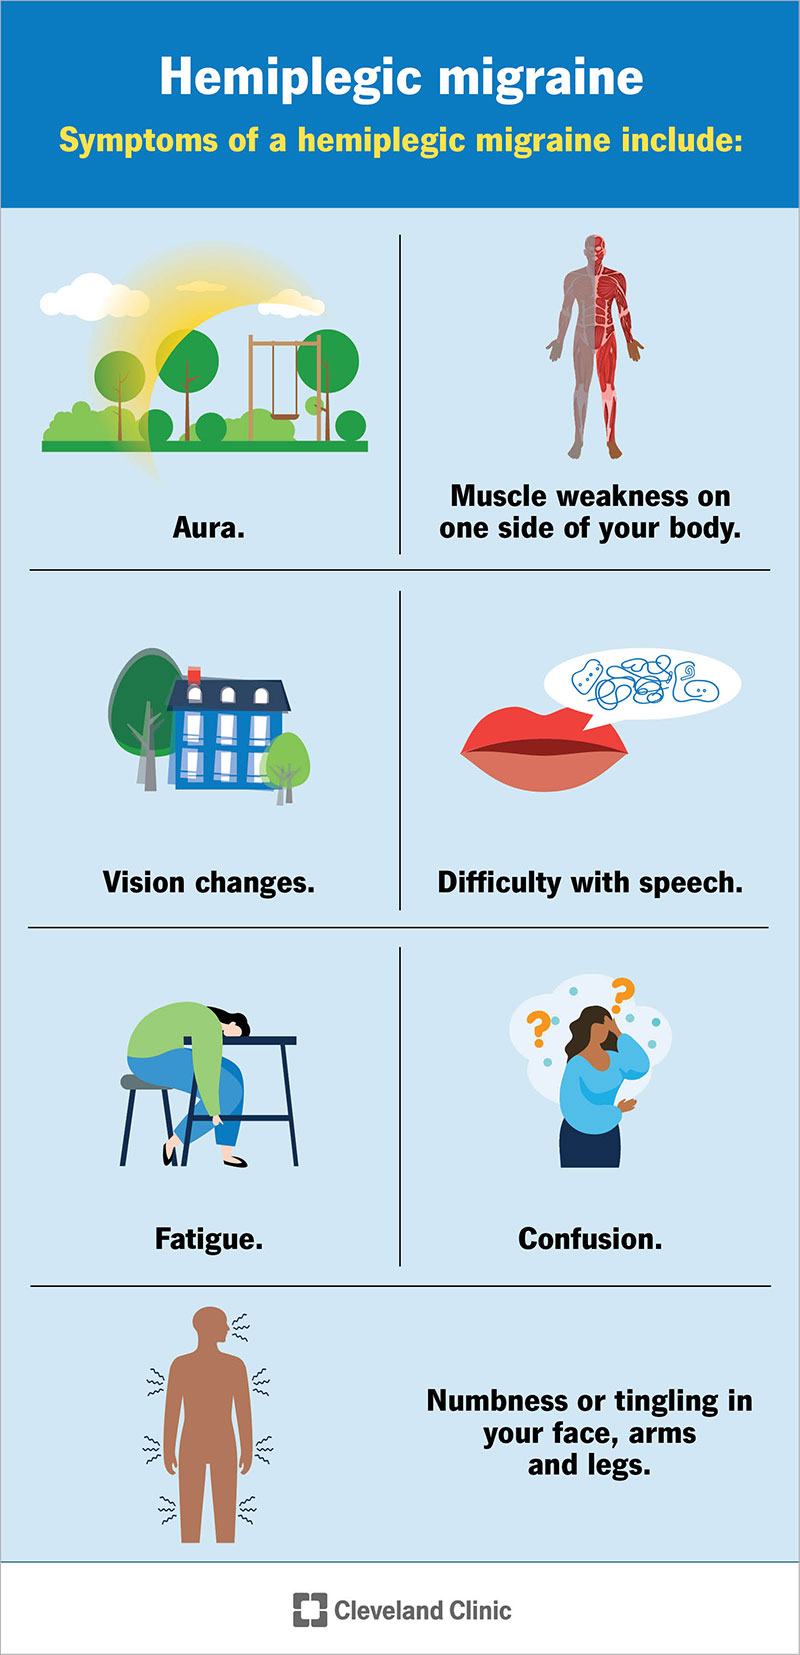 Symptoms of a hemiplegic migraine that affect your muscles, speech and vision.